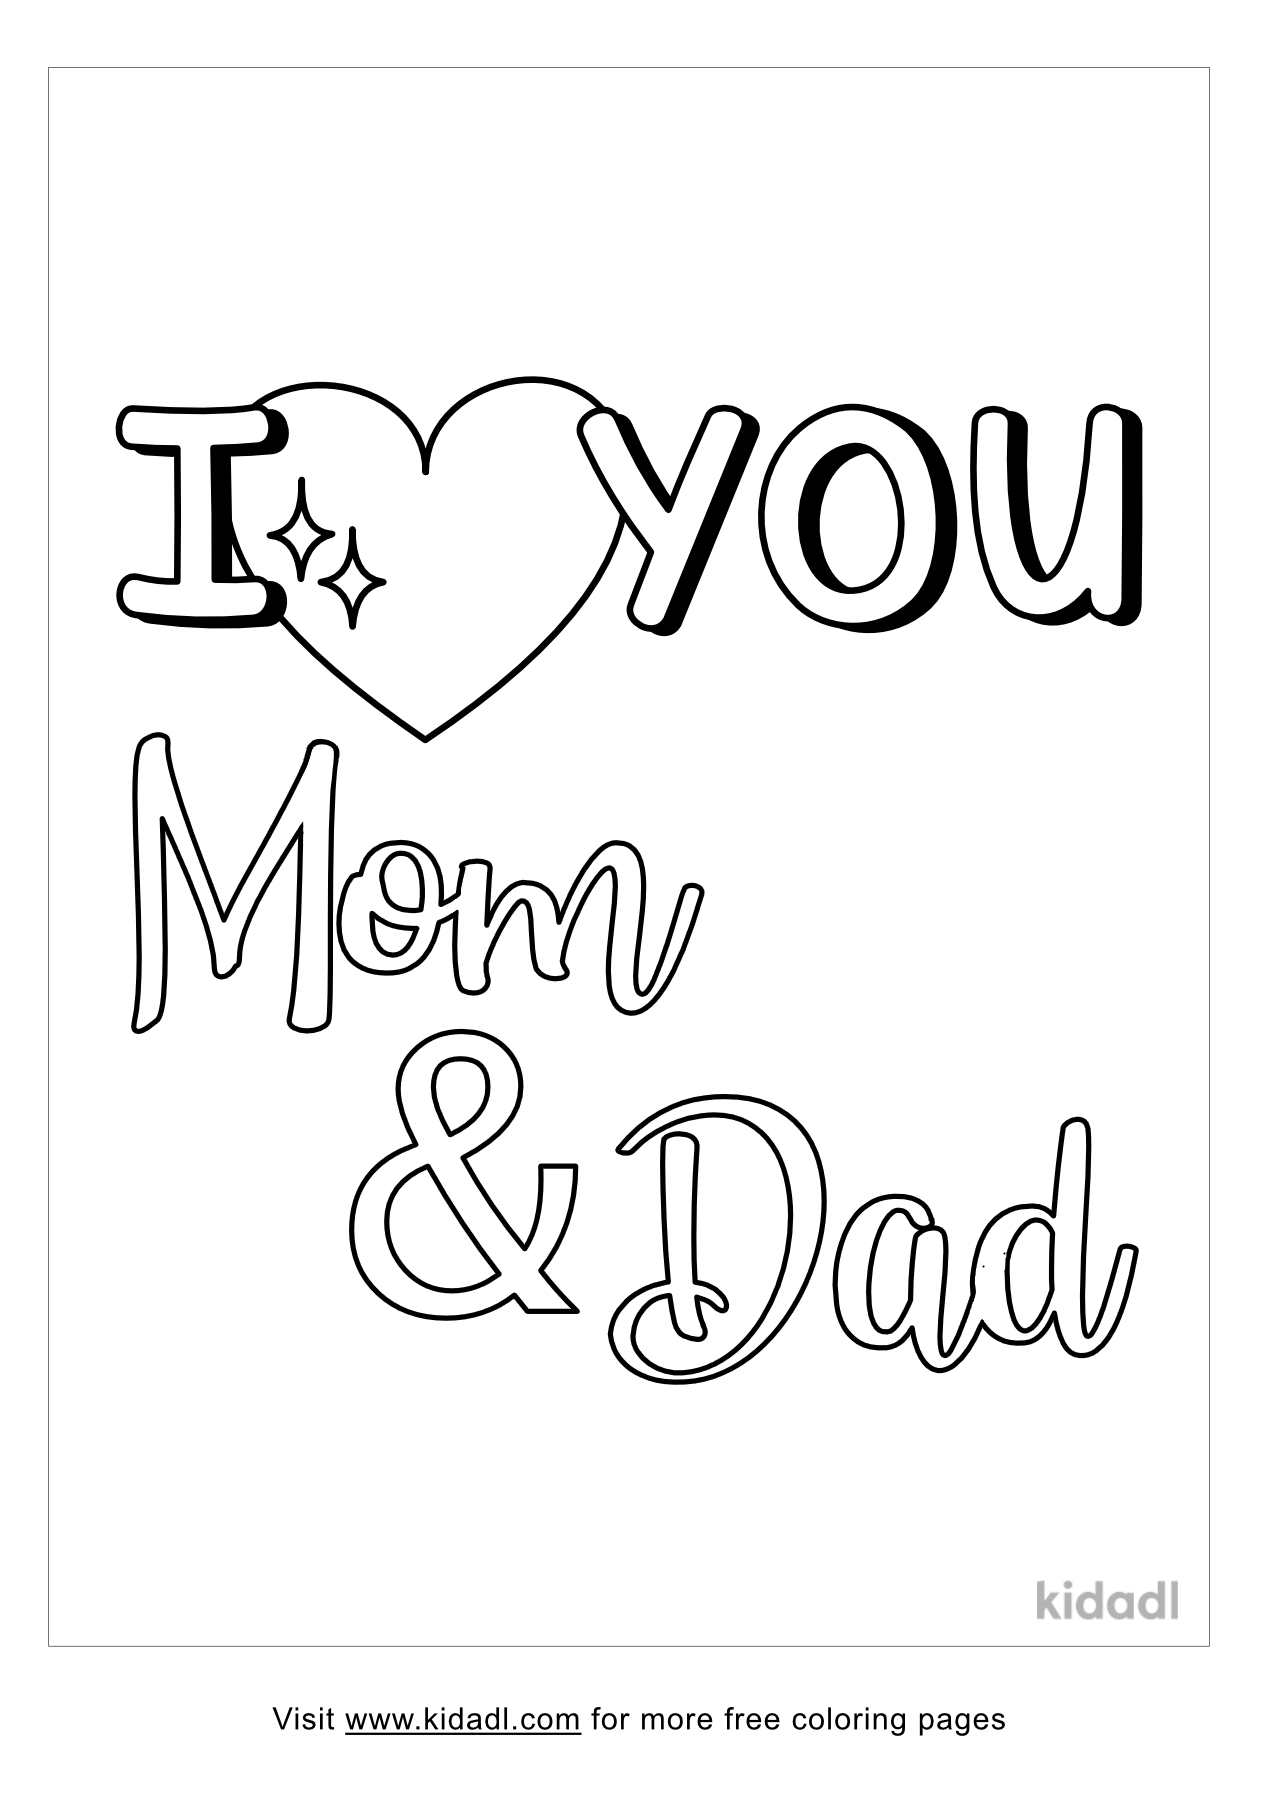 I Love You Mom And Dad Coloring Pages | Free Words-and-quotes Coloring Pages  | Kidadl